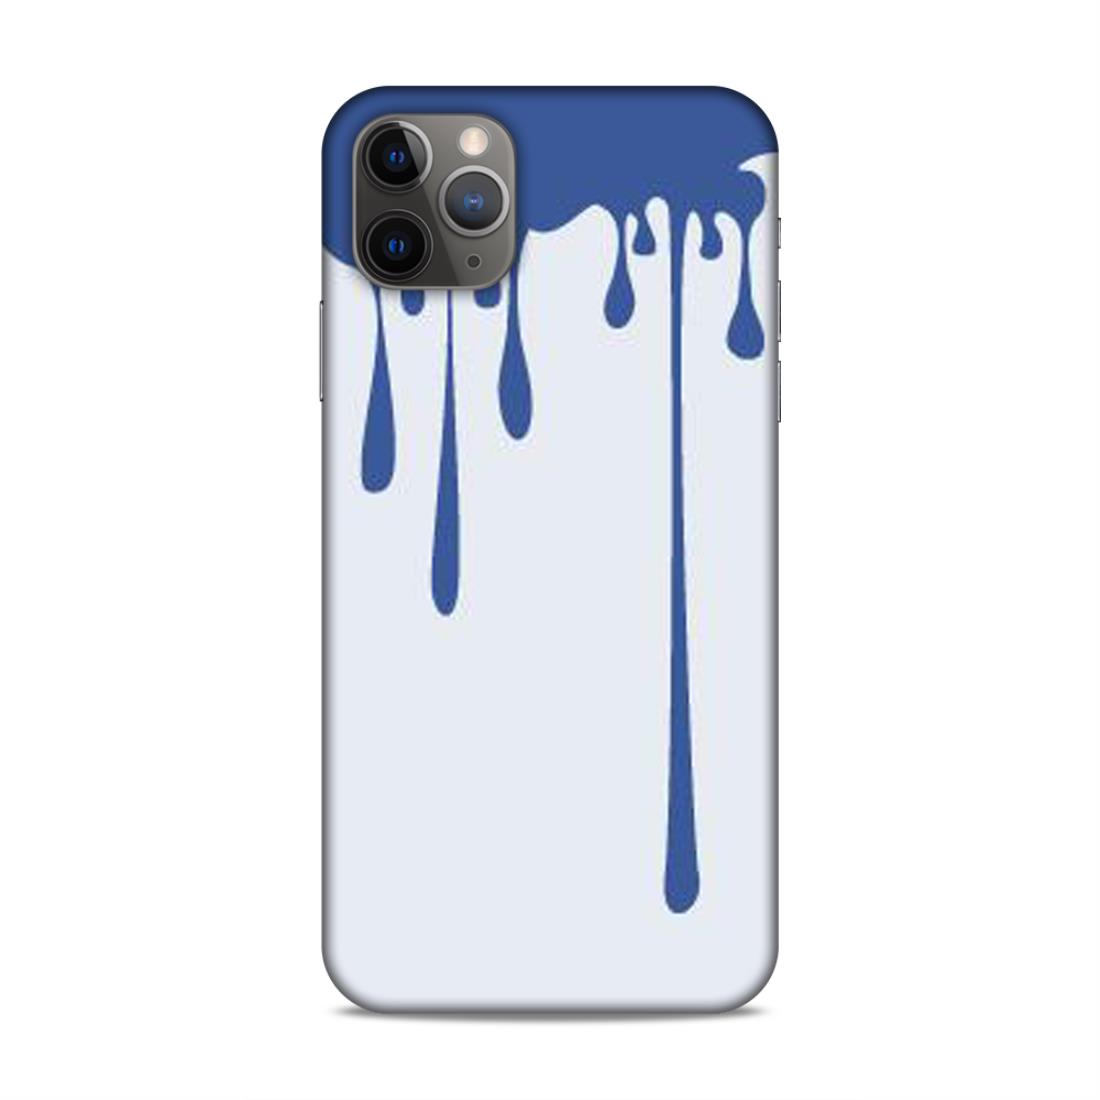 Abstract Hard Back Case For Apple iPhone 11 Pro Max